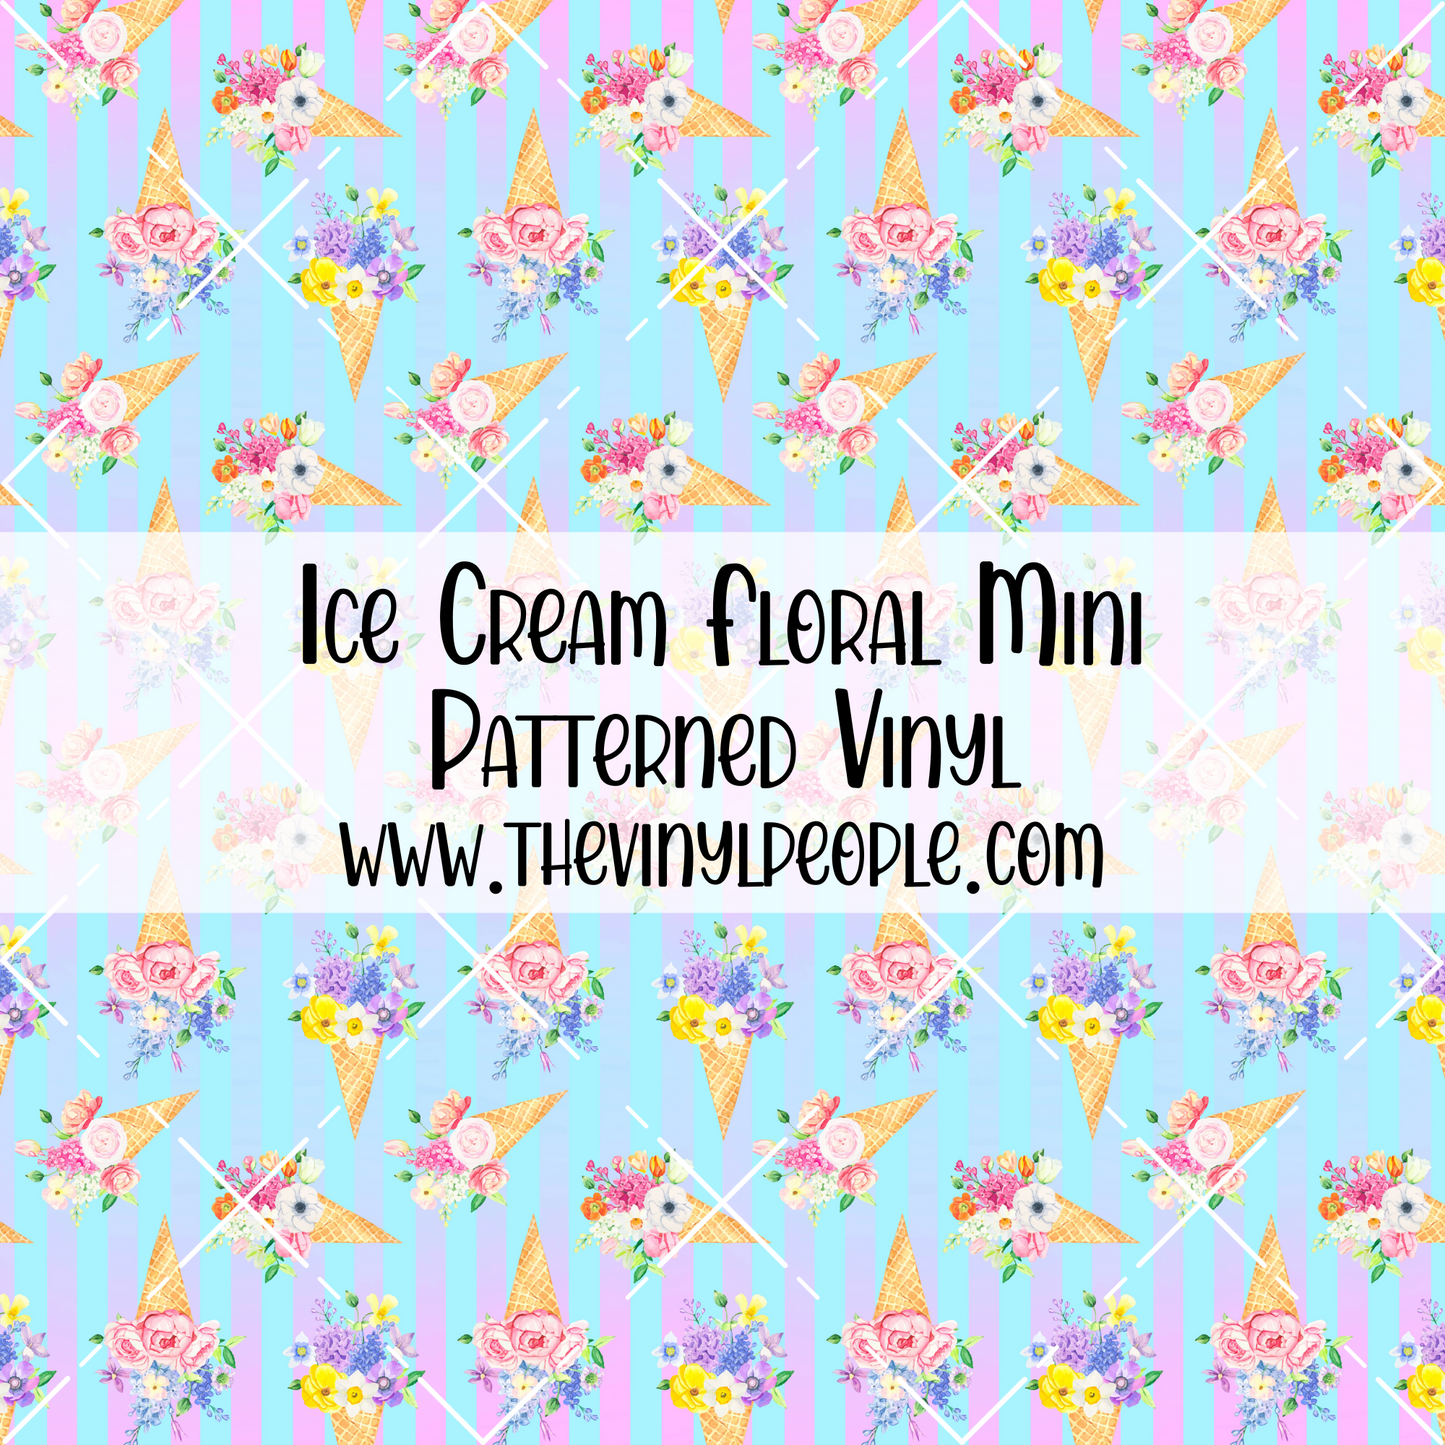 Ice Cream Floral Patterned Vinyl